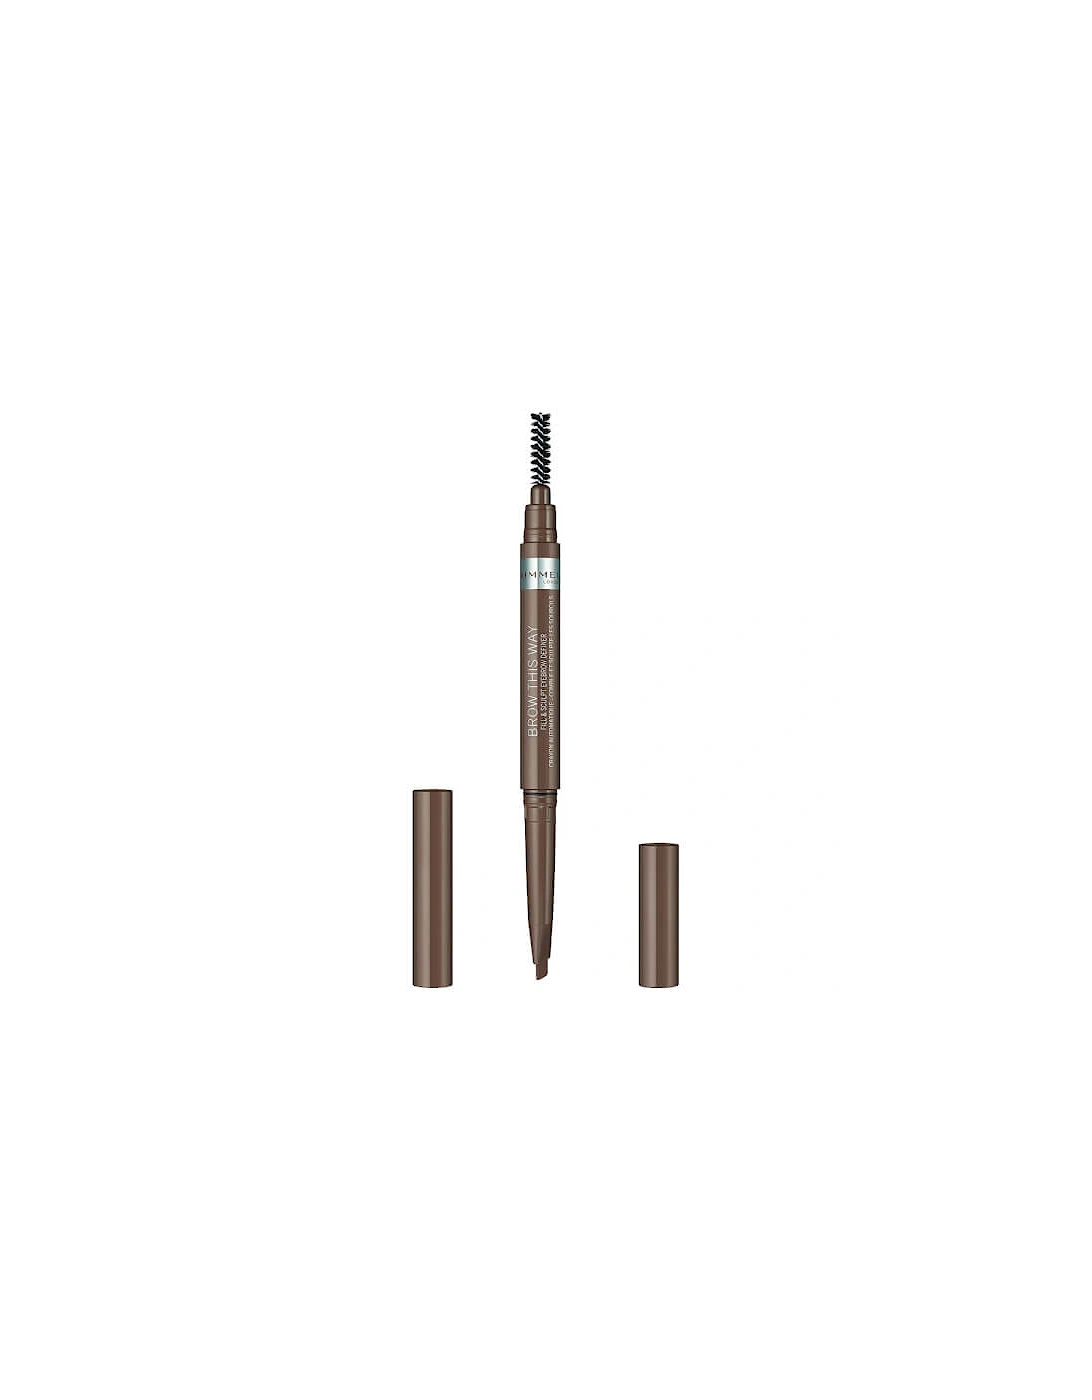 Brow This Way Fill and Sculpt Eyebrow Definer 0.25g - Blonde - - Brow This Way Fill and Sculpt Eyebrow Definer 0.25g - Blonde - Brow This Way Fill and Sculpt Eyebrow Definer 0.4g - Medium Brown - Brow This Way Fill and Sculpt Eyebrow Definer 0.4g - Dark Brown - Brow This Way Fill and Sculpt Eyebrow Definer 0.4g - Soft Black, 2 of 1